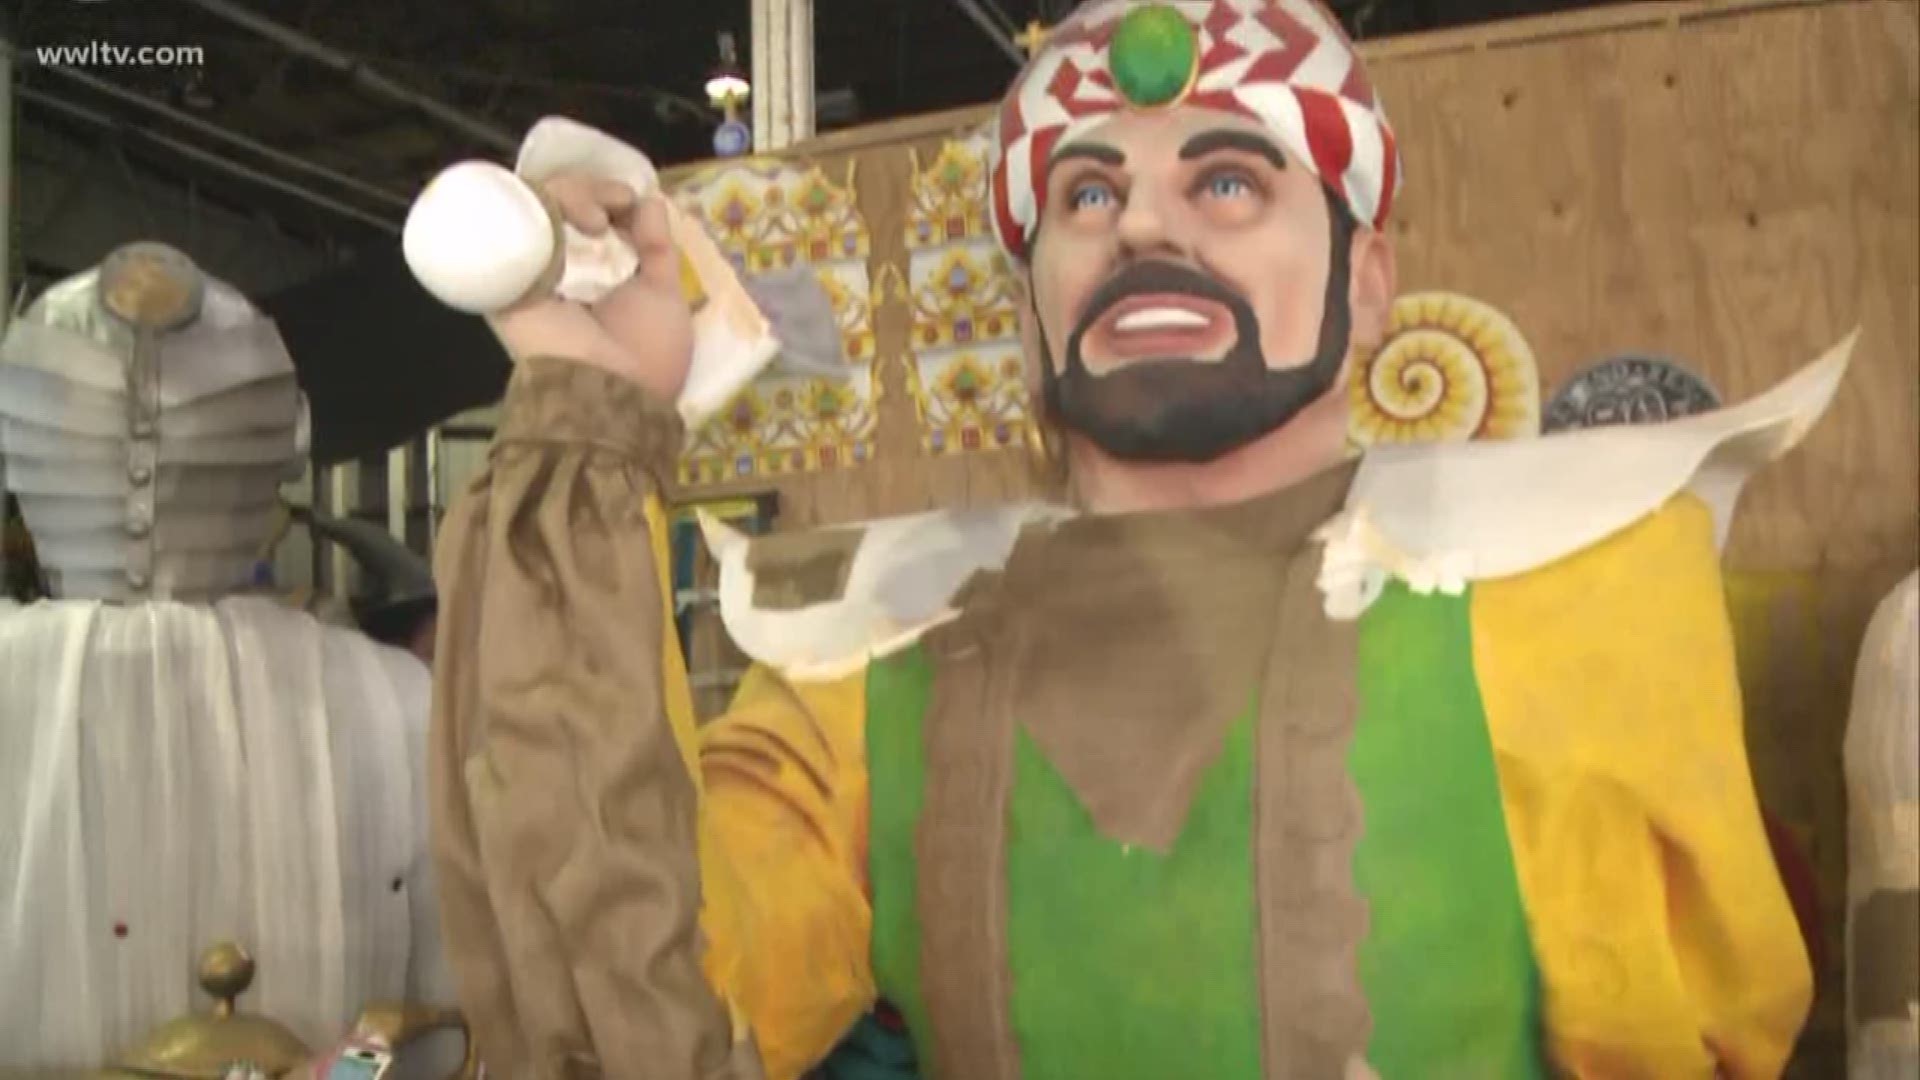 Meghan Kee takes an inside look at the creating process of this years Mardi Gras floats.